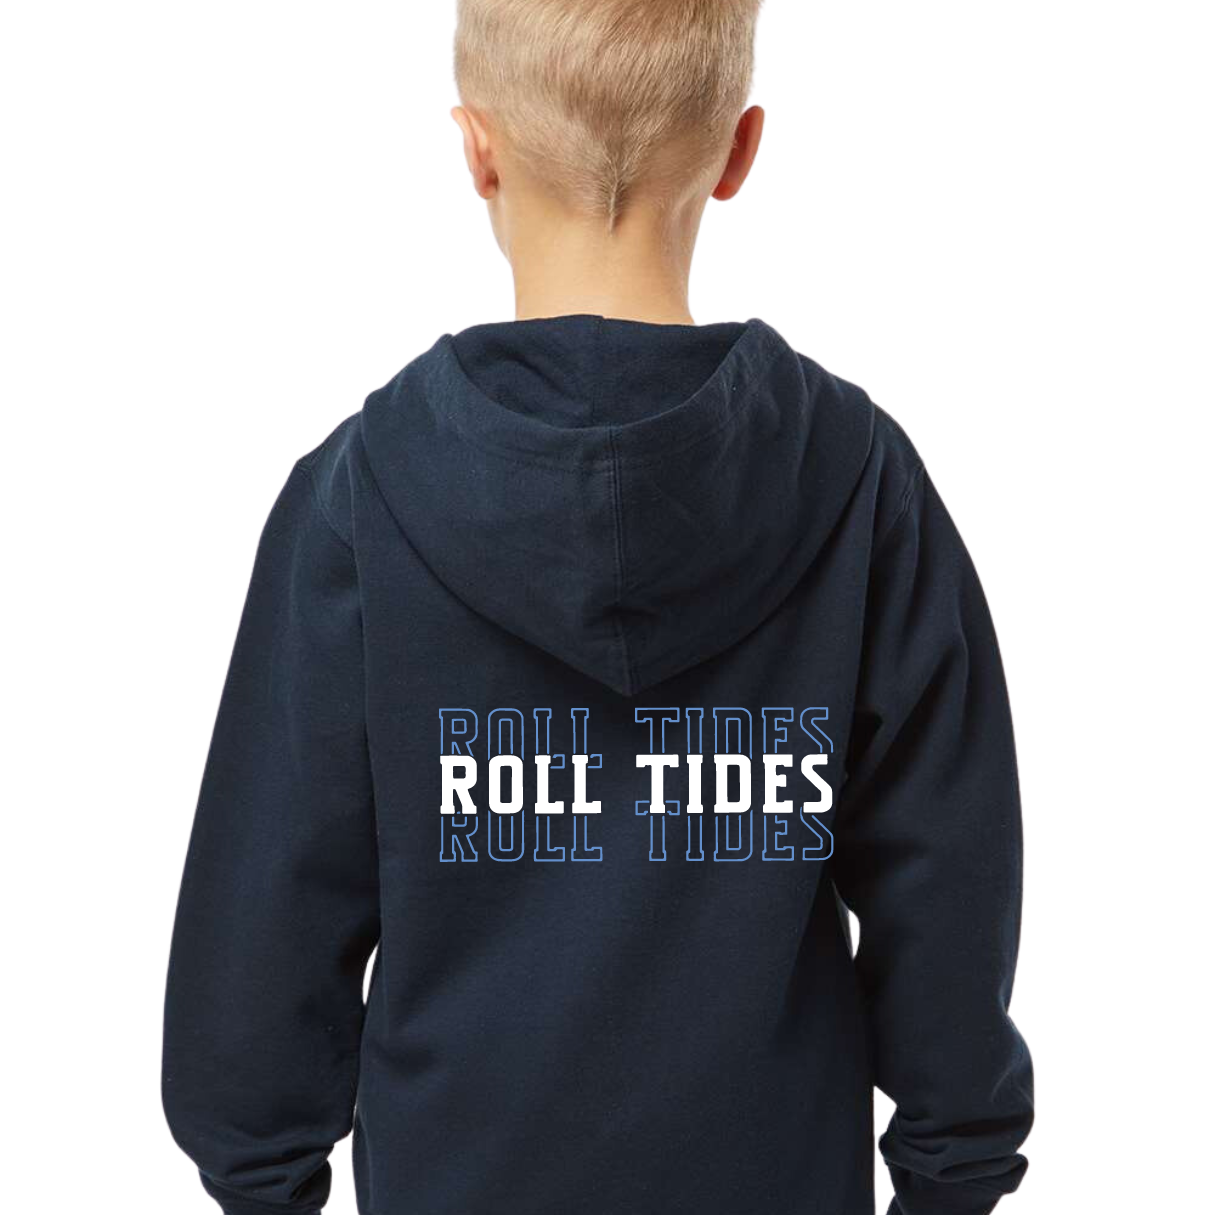 Tides Full Zipper Hooded Sweatshirt -Youth ONLY